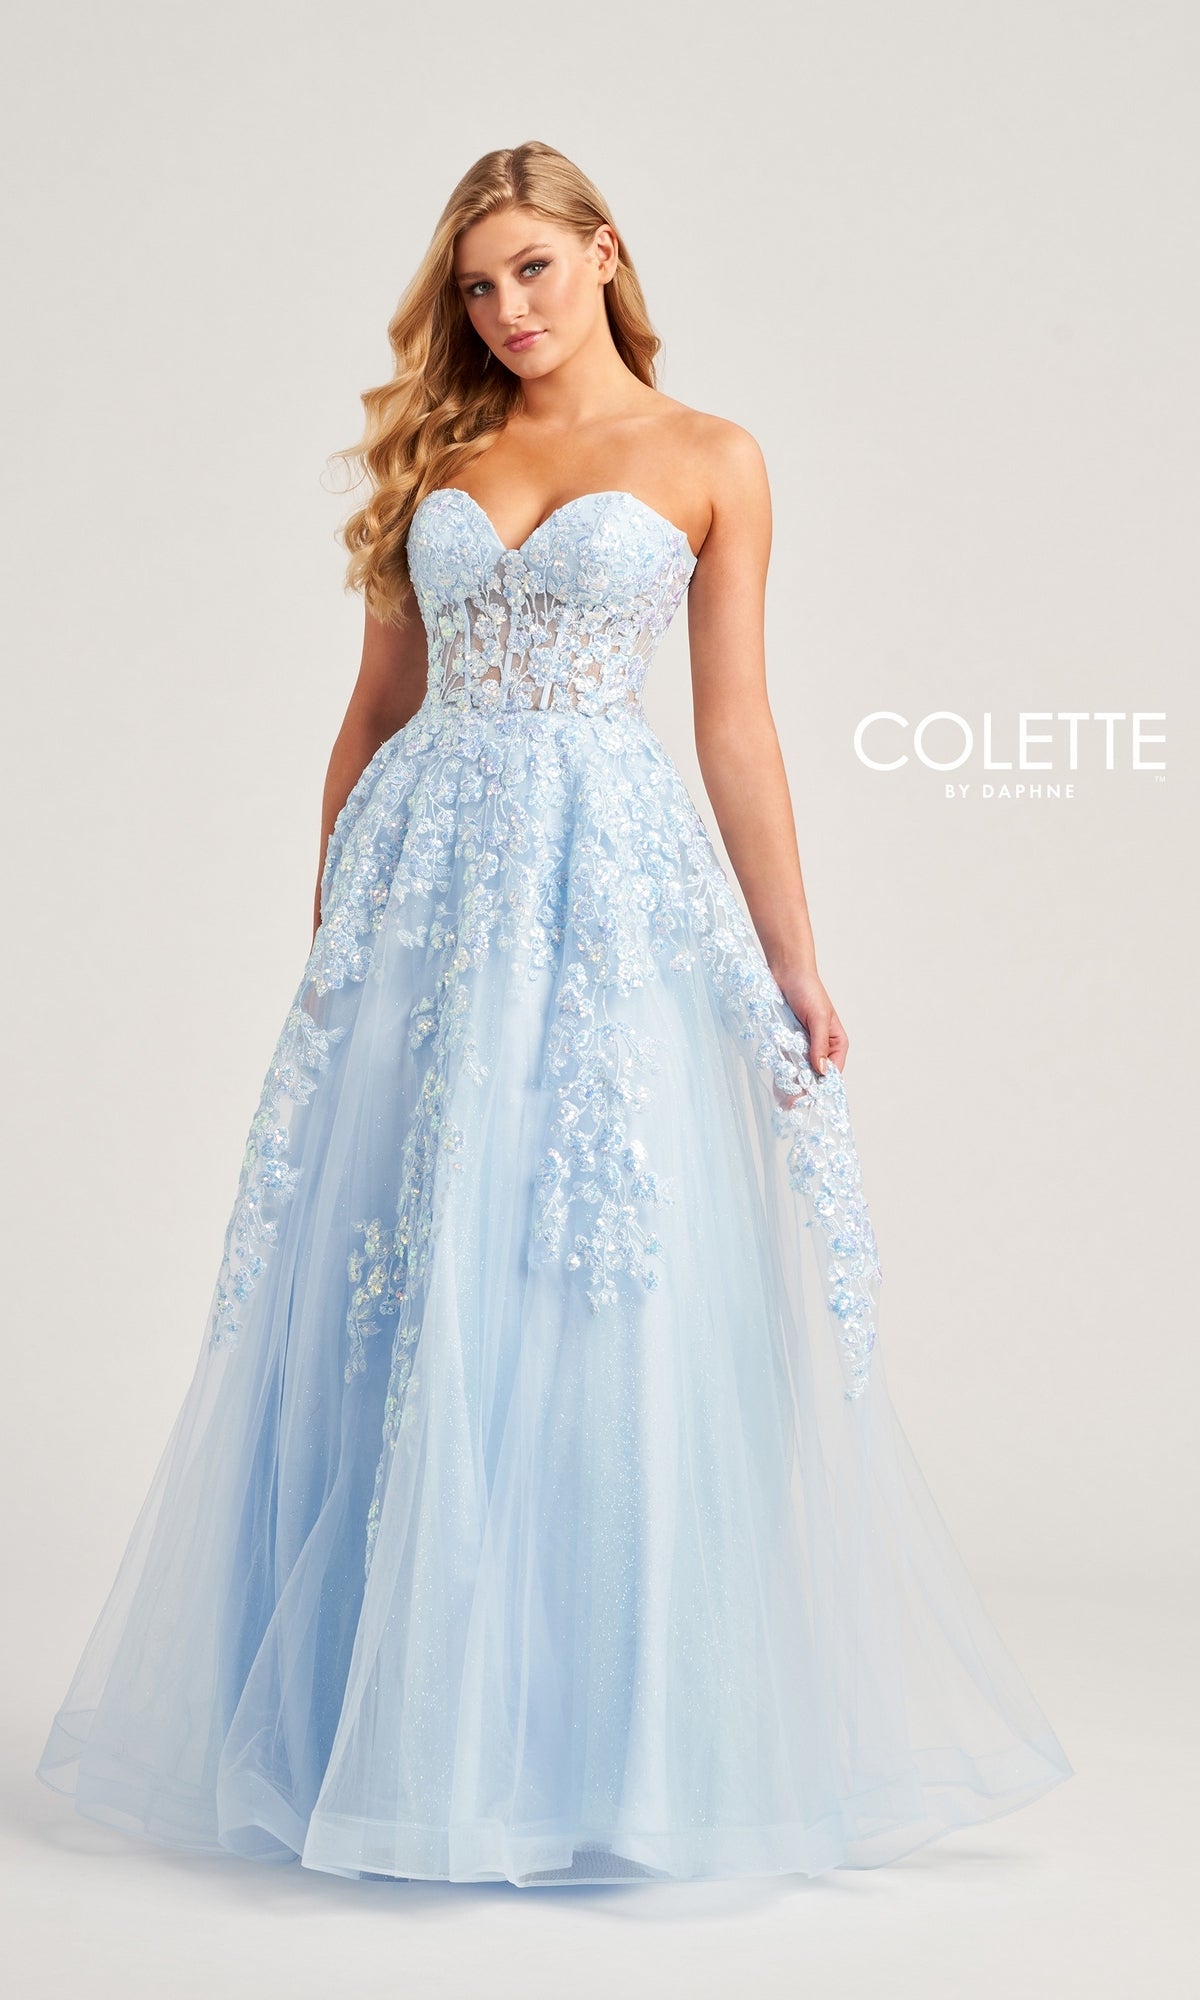 Colette Strapless Sweetheart Prom Ball Gown CL5136